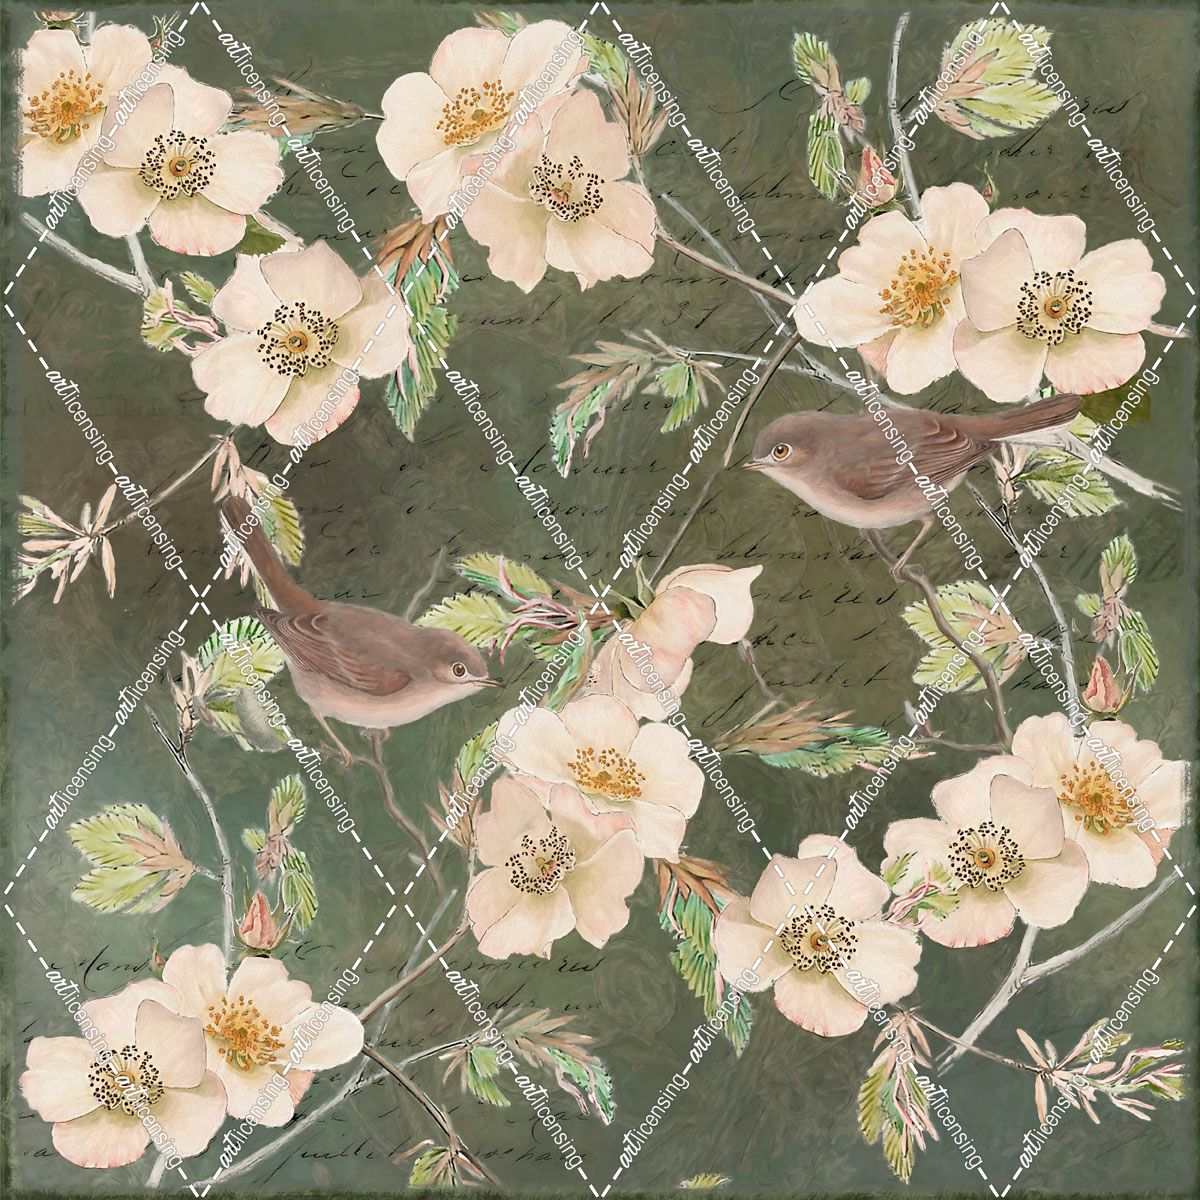 Roses and Birds